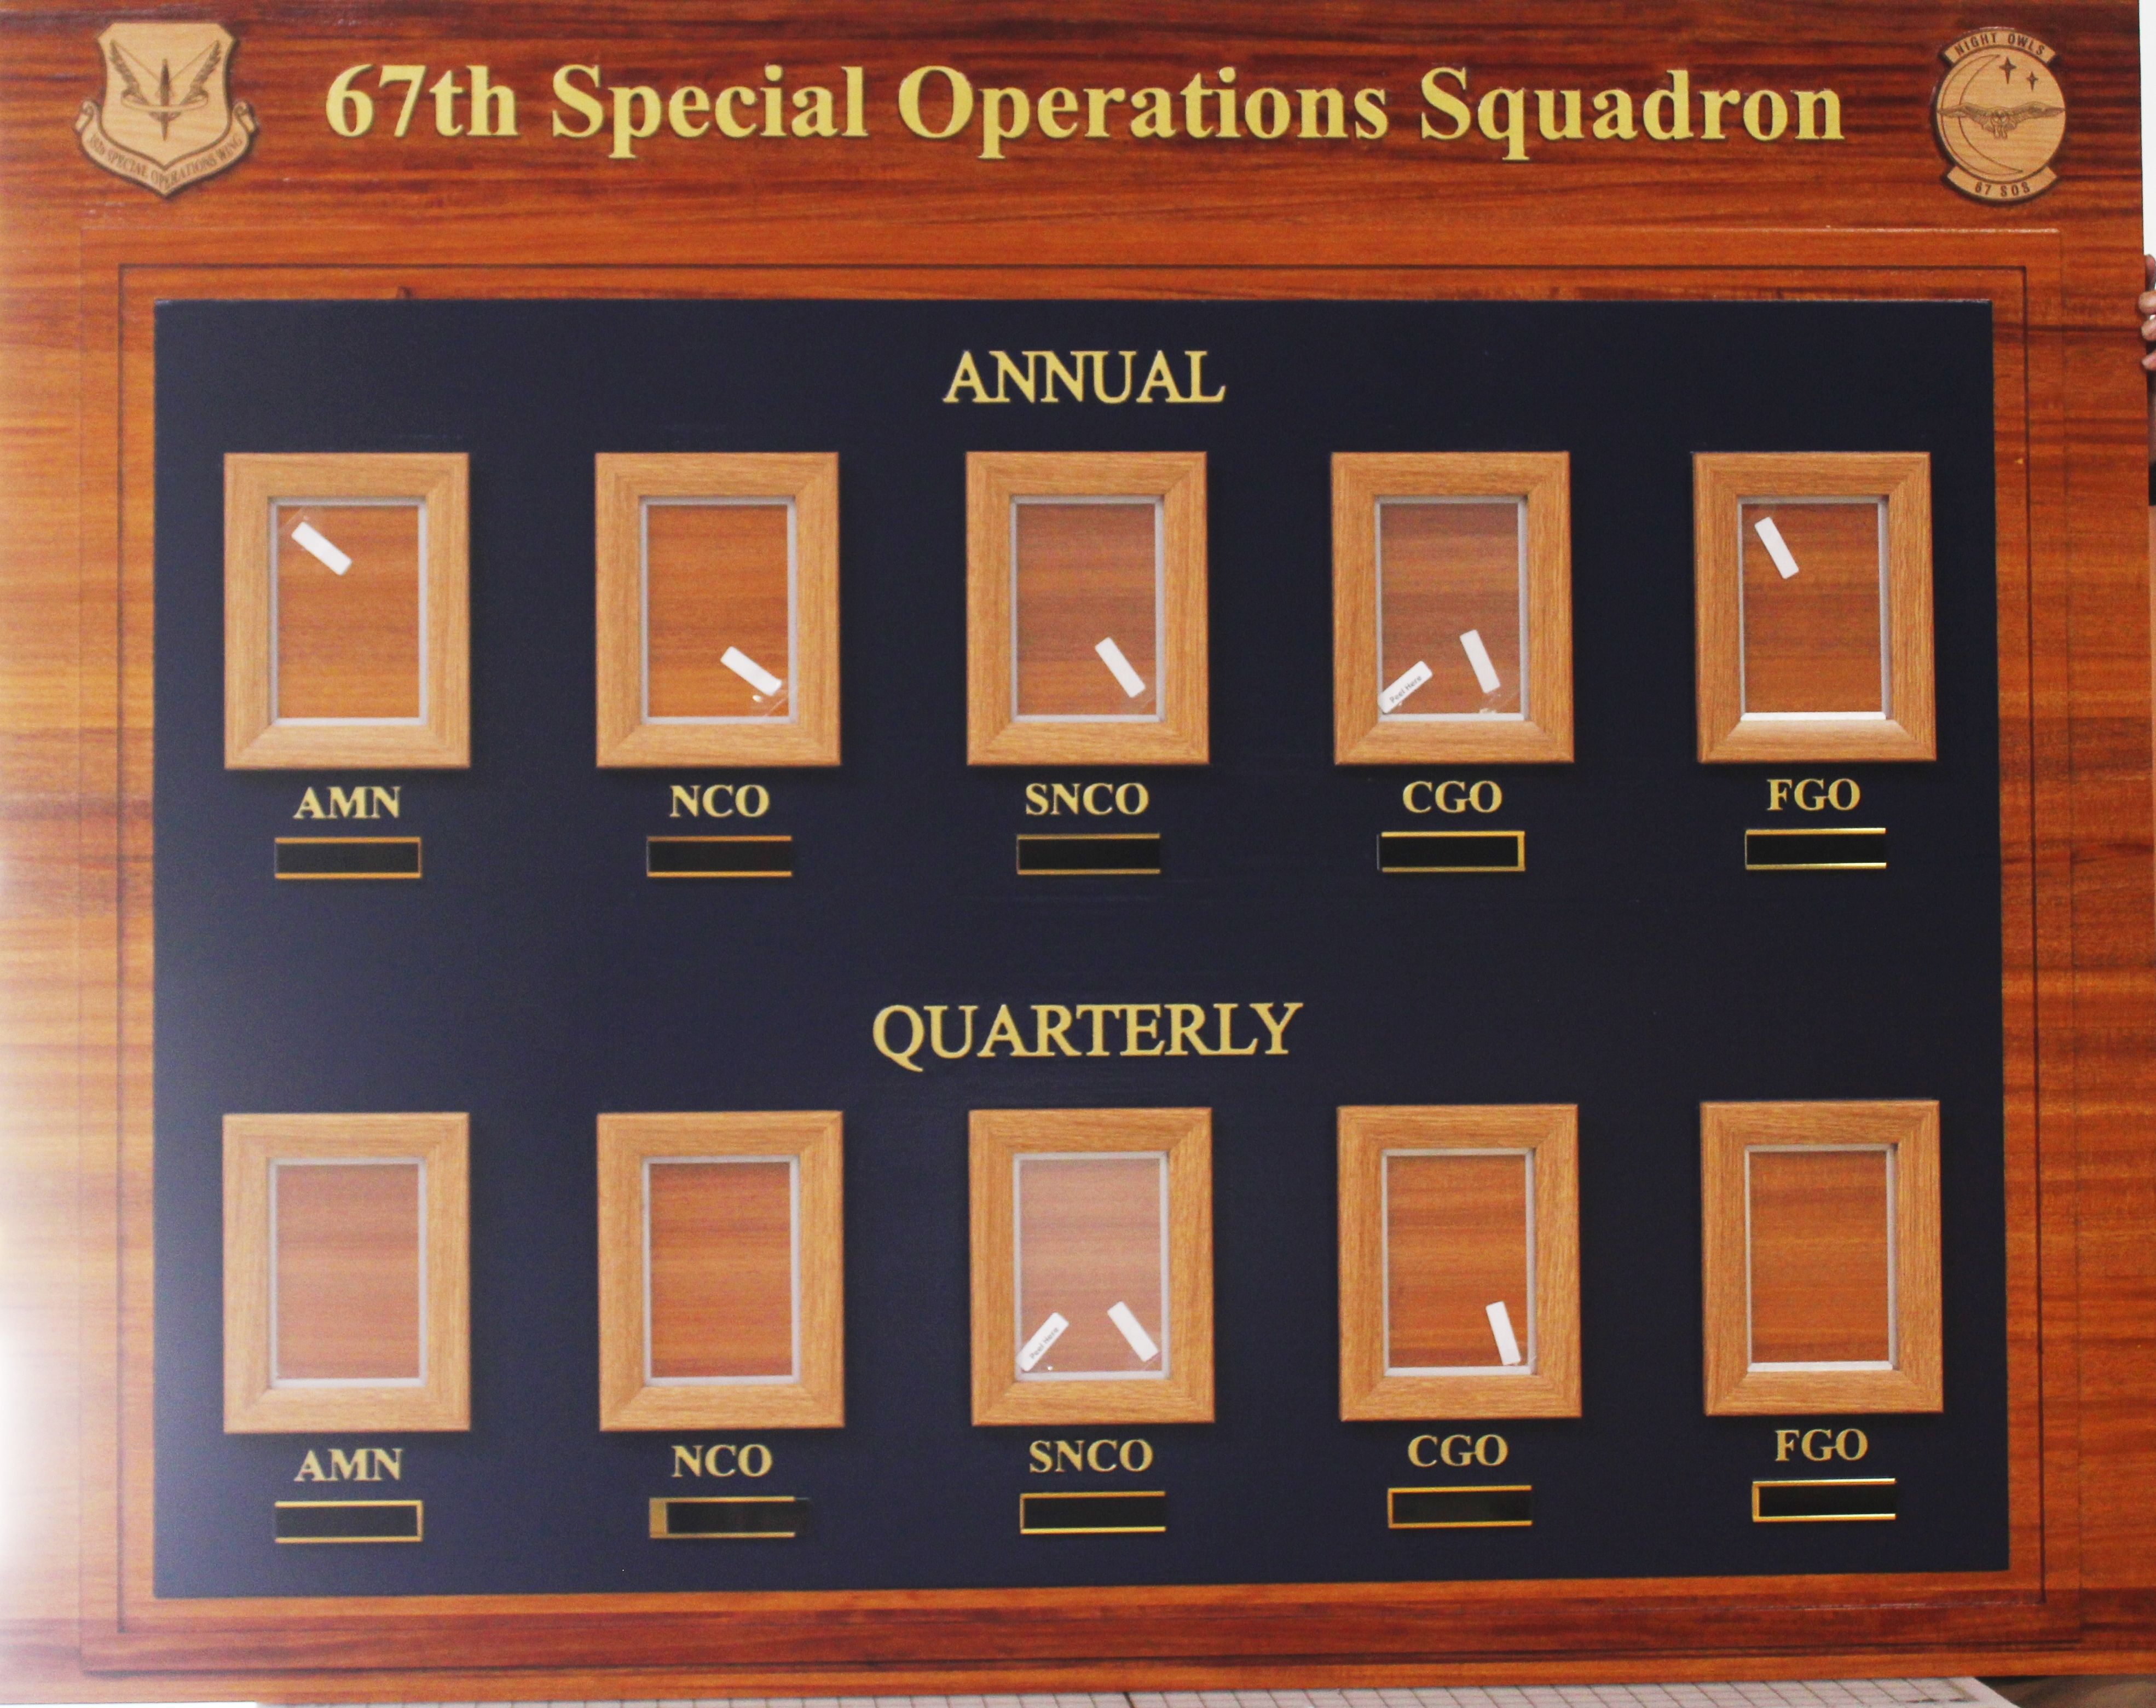 SB1033 - Mahogany and Alder Wood Photo  Board for the Quarter and Annual Awards for Officers and Airmen of the Air Force's 67th Special Forces Squadron